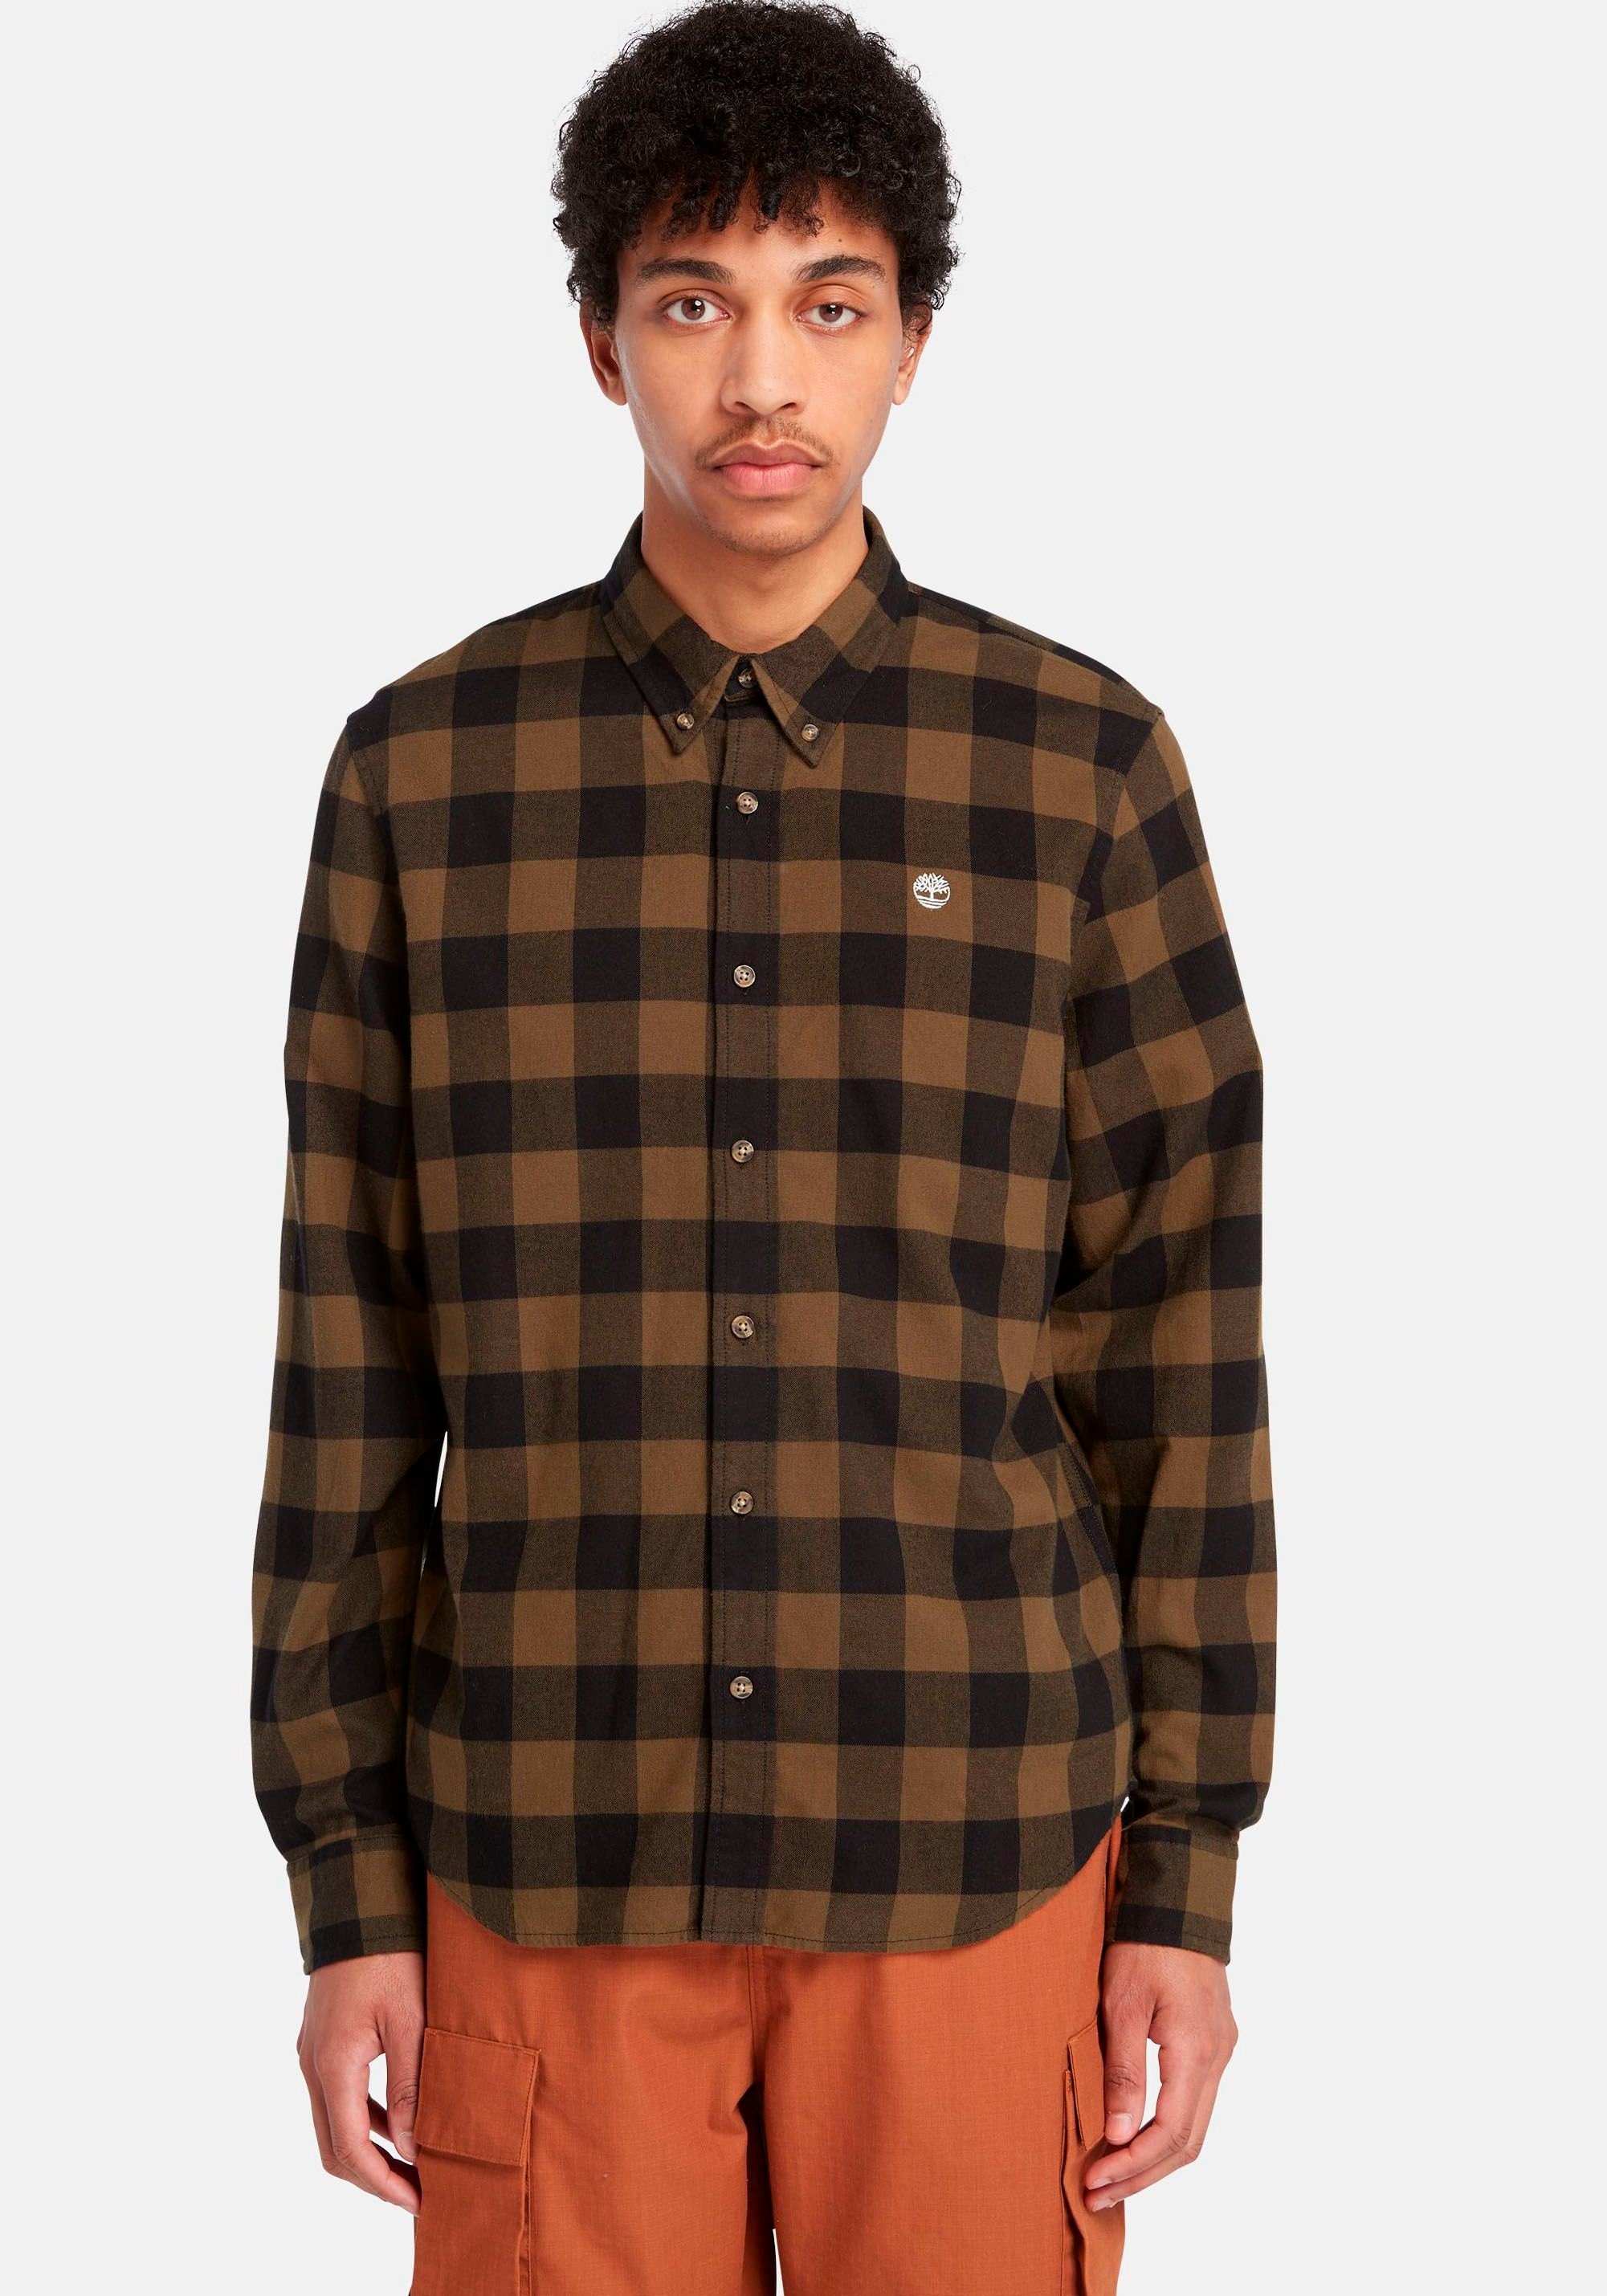 YD LS Olive S/Cell Mascoma River with Dark Langarmshirt Timberland Fabric